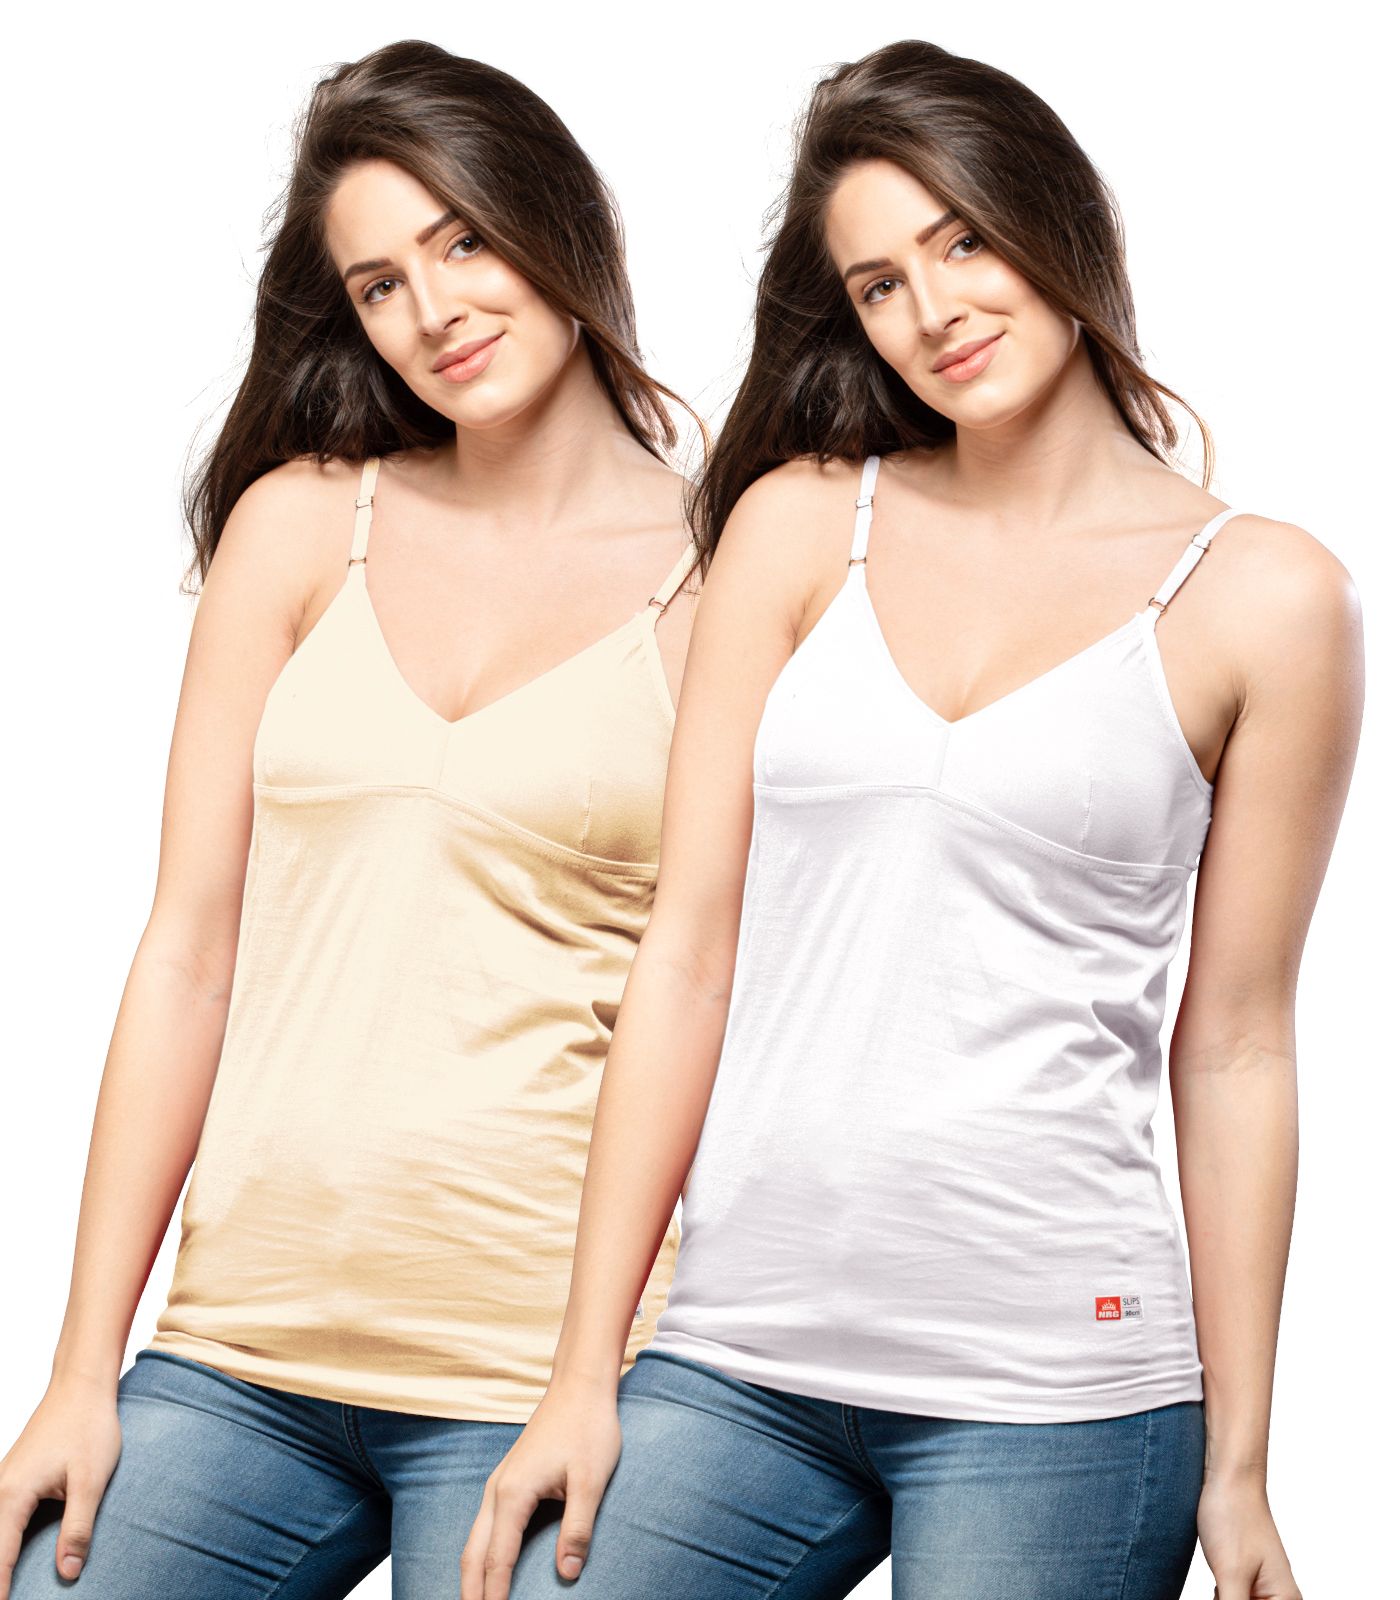 NRG Womens Cotton Assorted Colour Bra Slips ( Pack of 2 Skin - White ) L14  Camisole